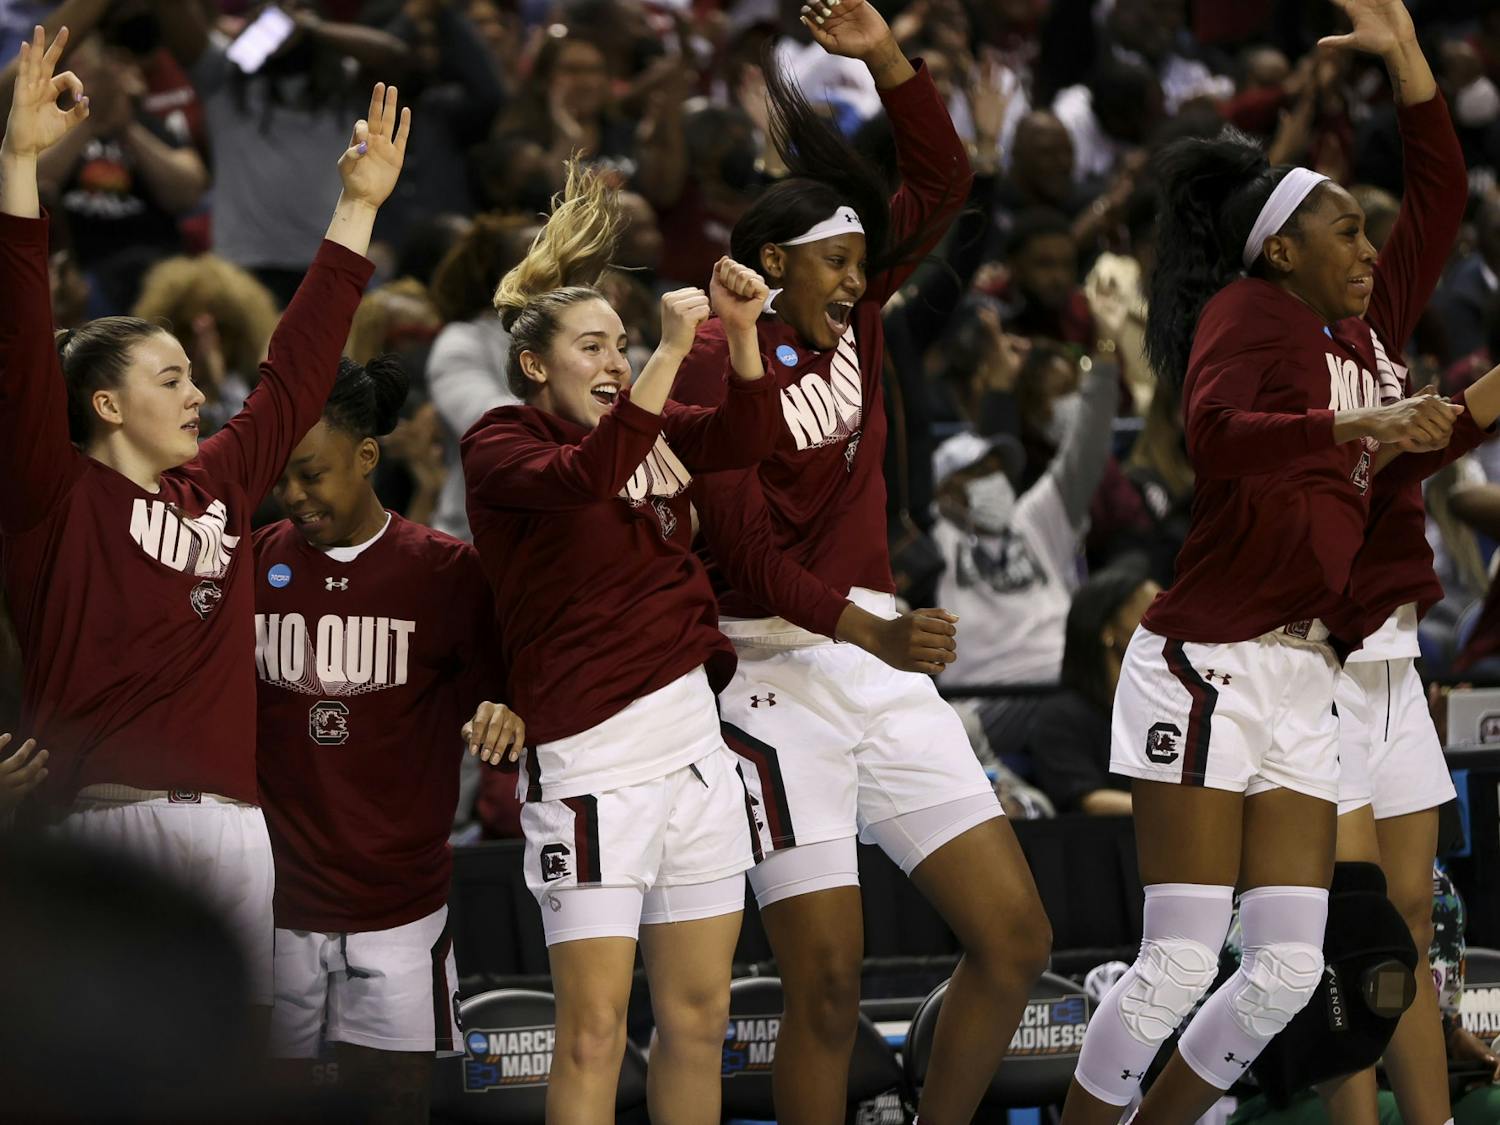 South Carolina's bench celebrates three-pointer in the second quarter of South Carolina's 69-61 victory over North Carolina in the Sweet Sixteen on March 25, 2022.